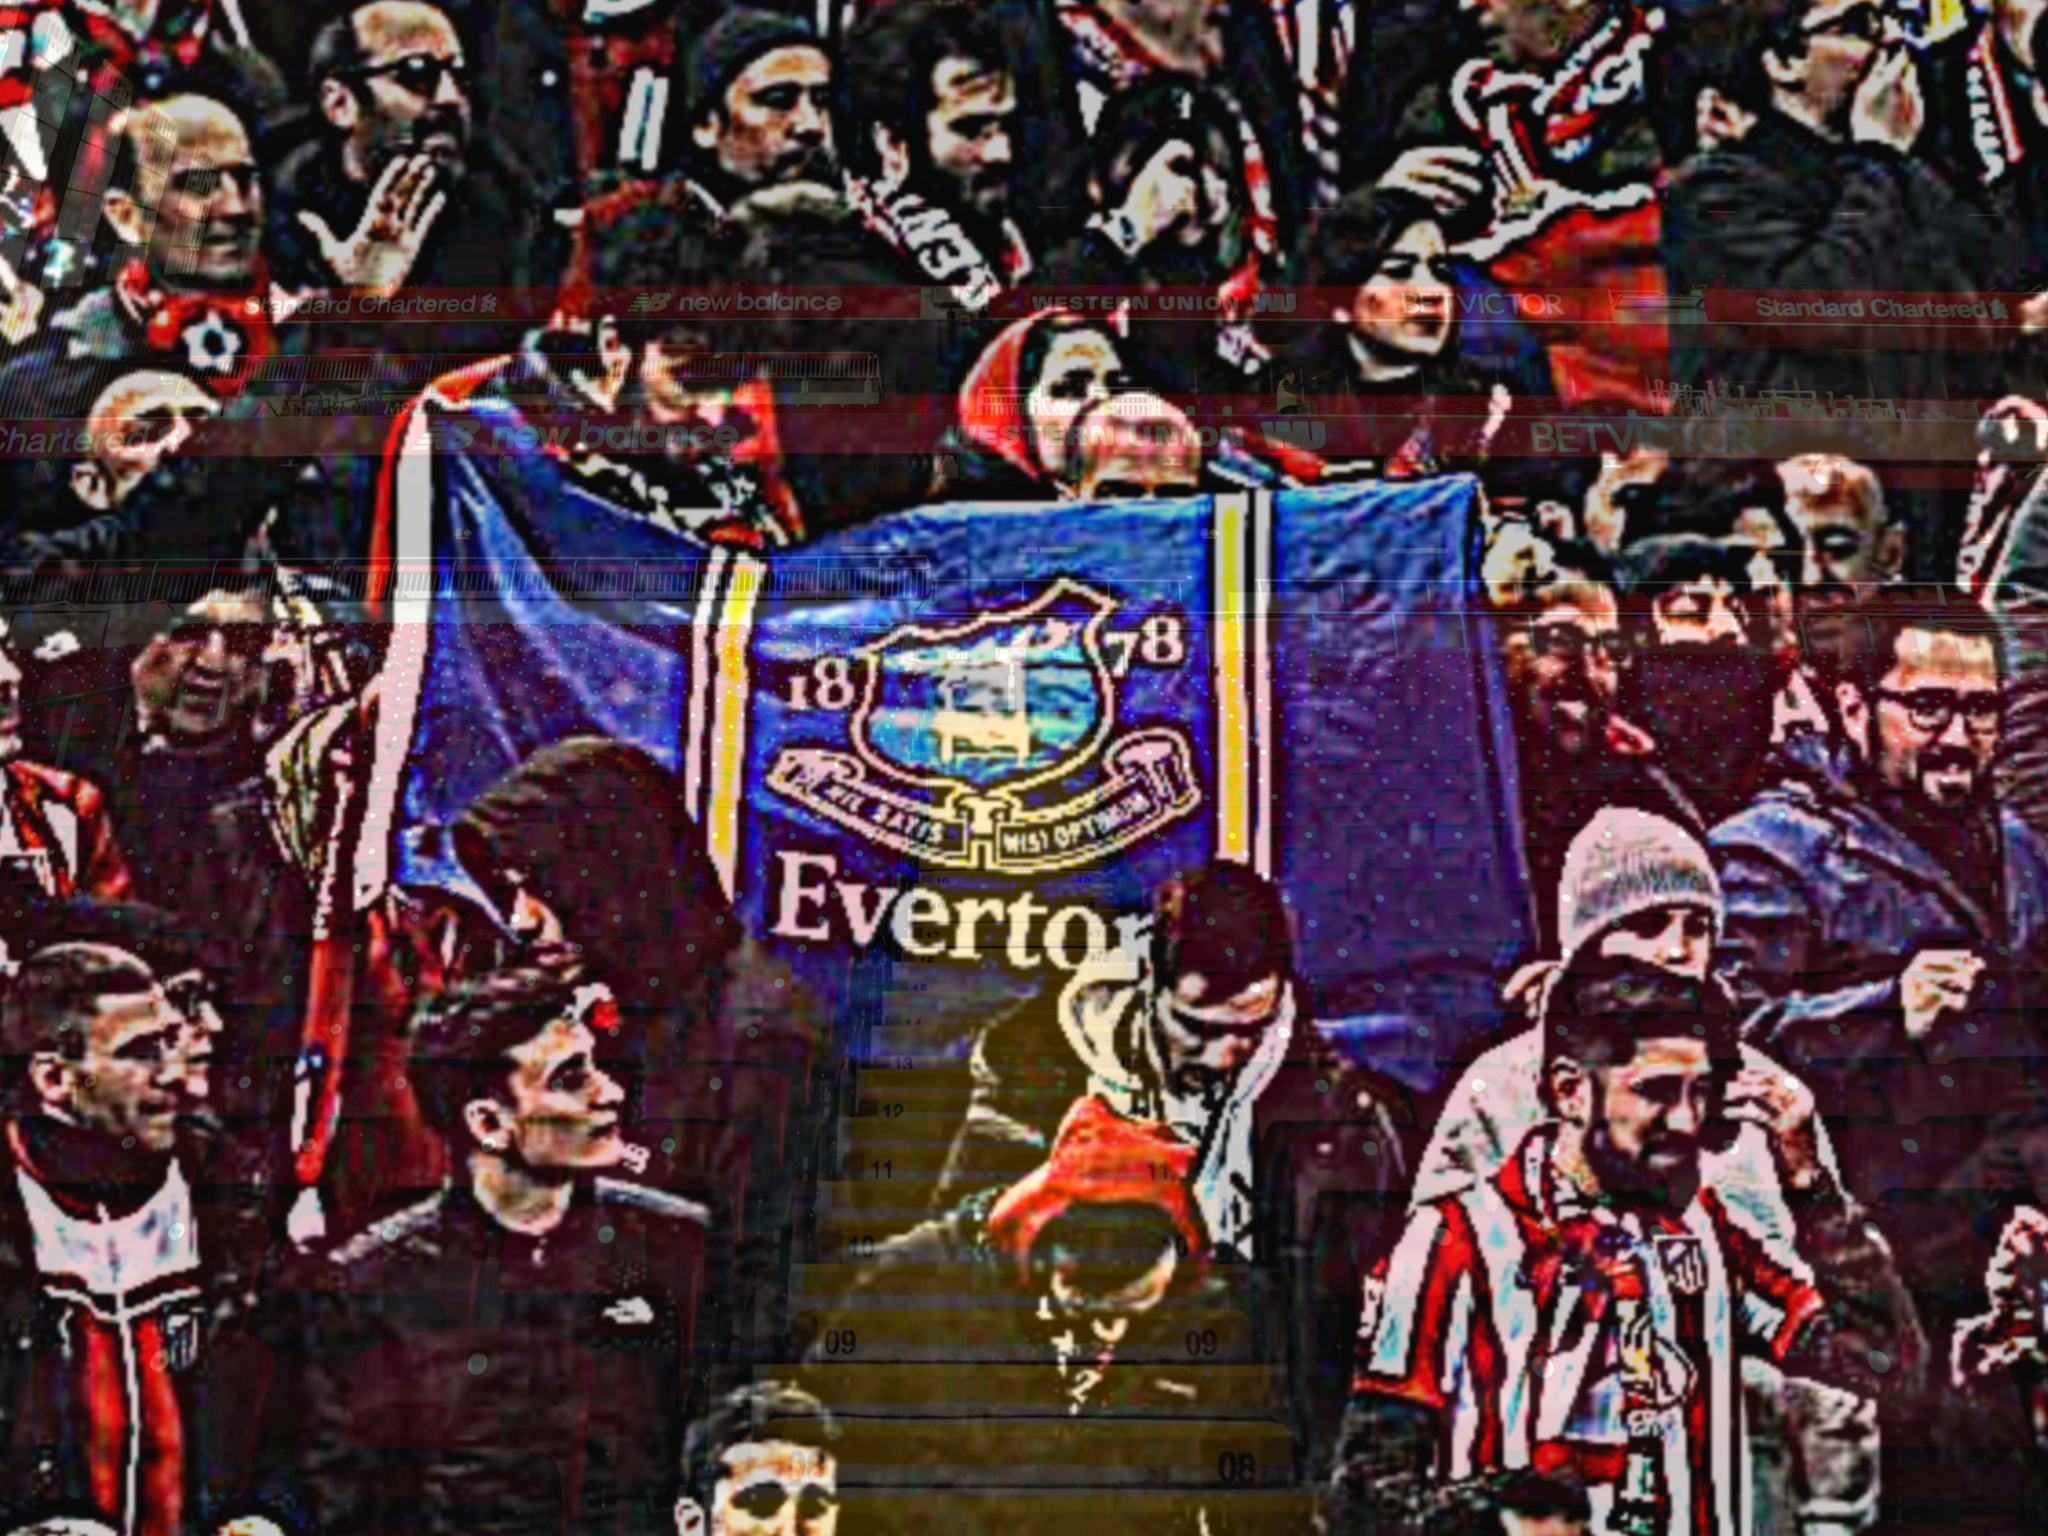 Photo – Atletico fans unfurled an Everton flag to troll Liverpool at Anfield